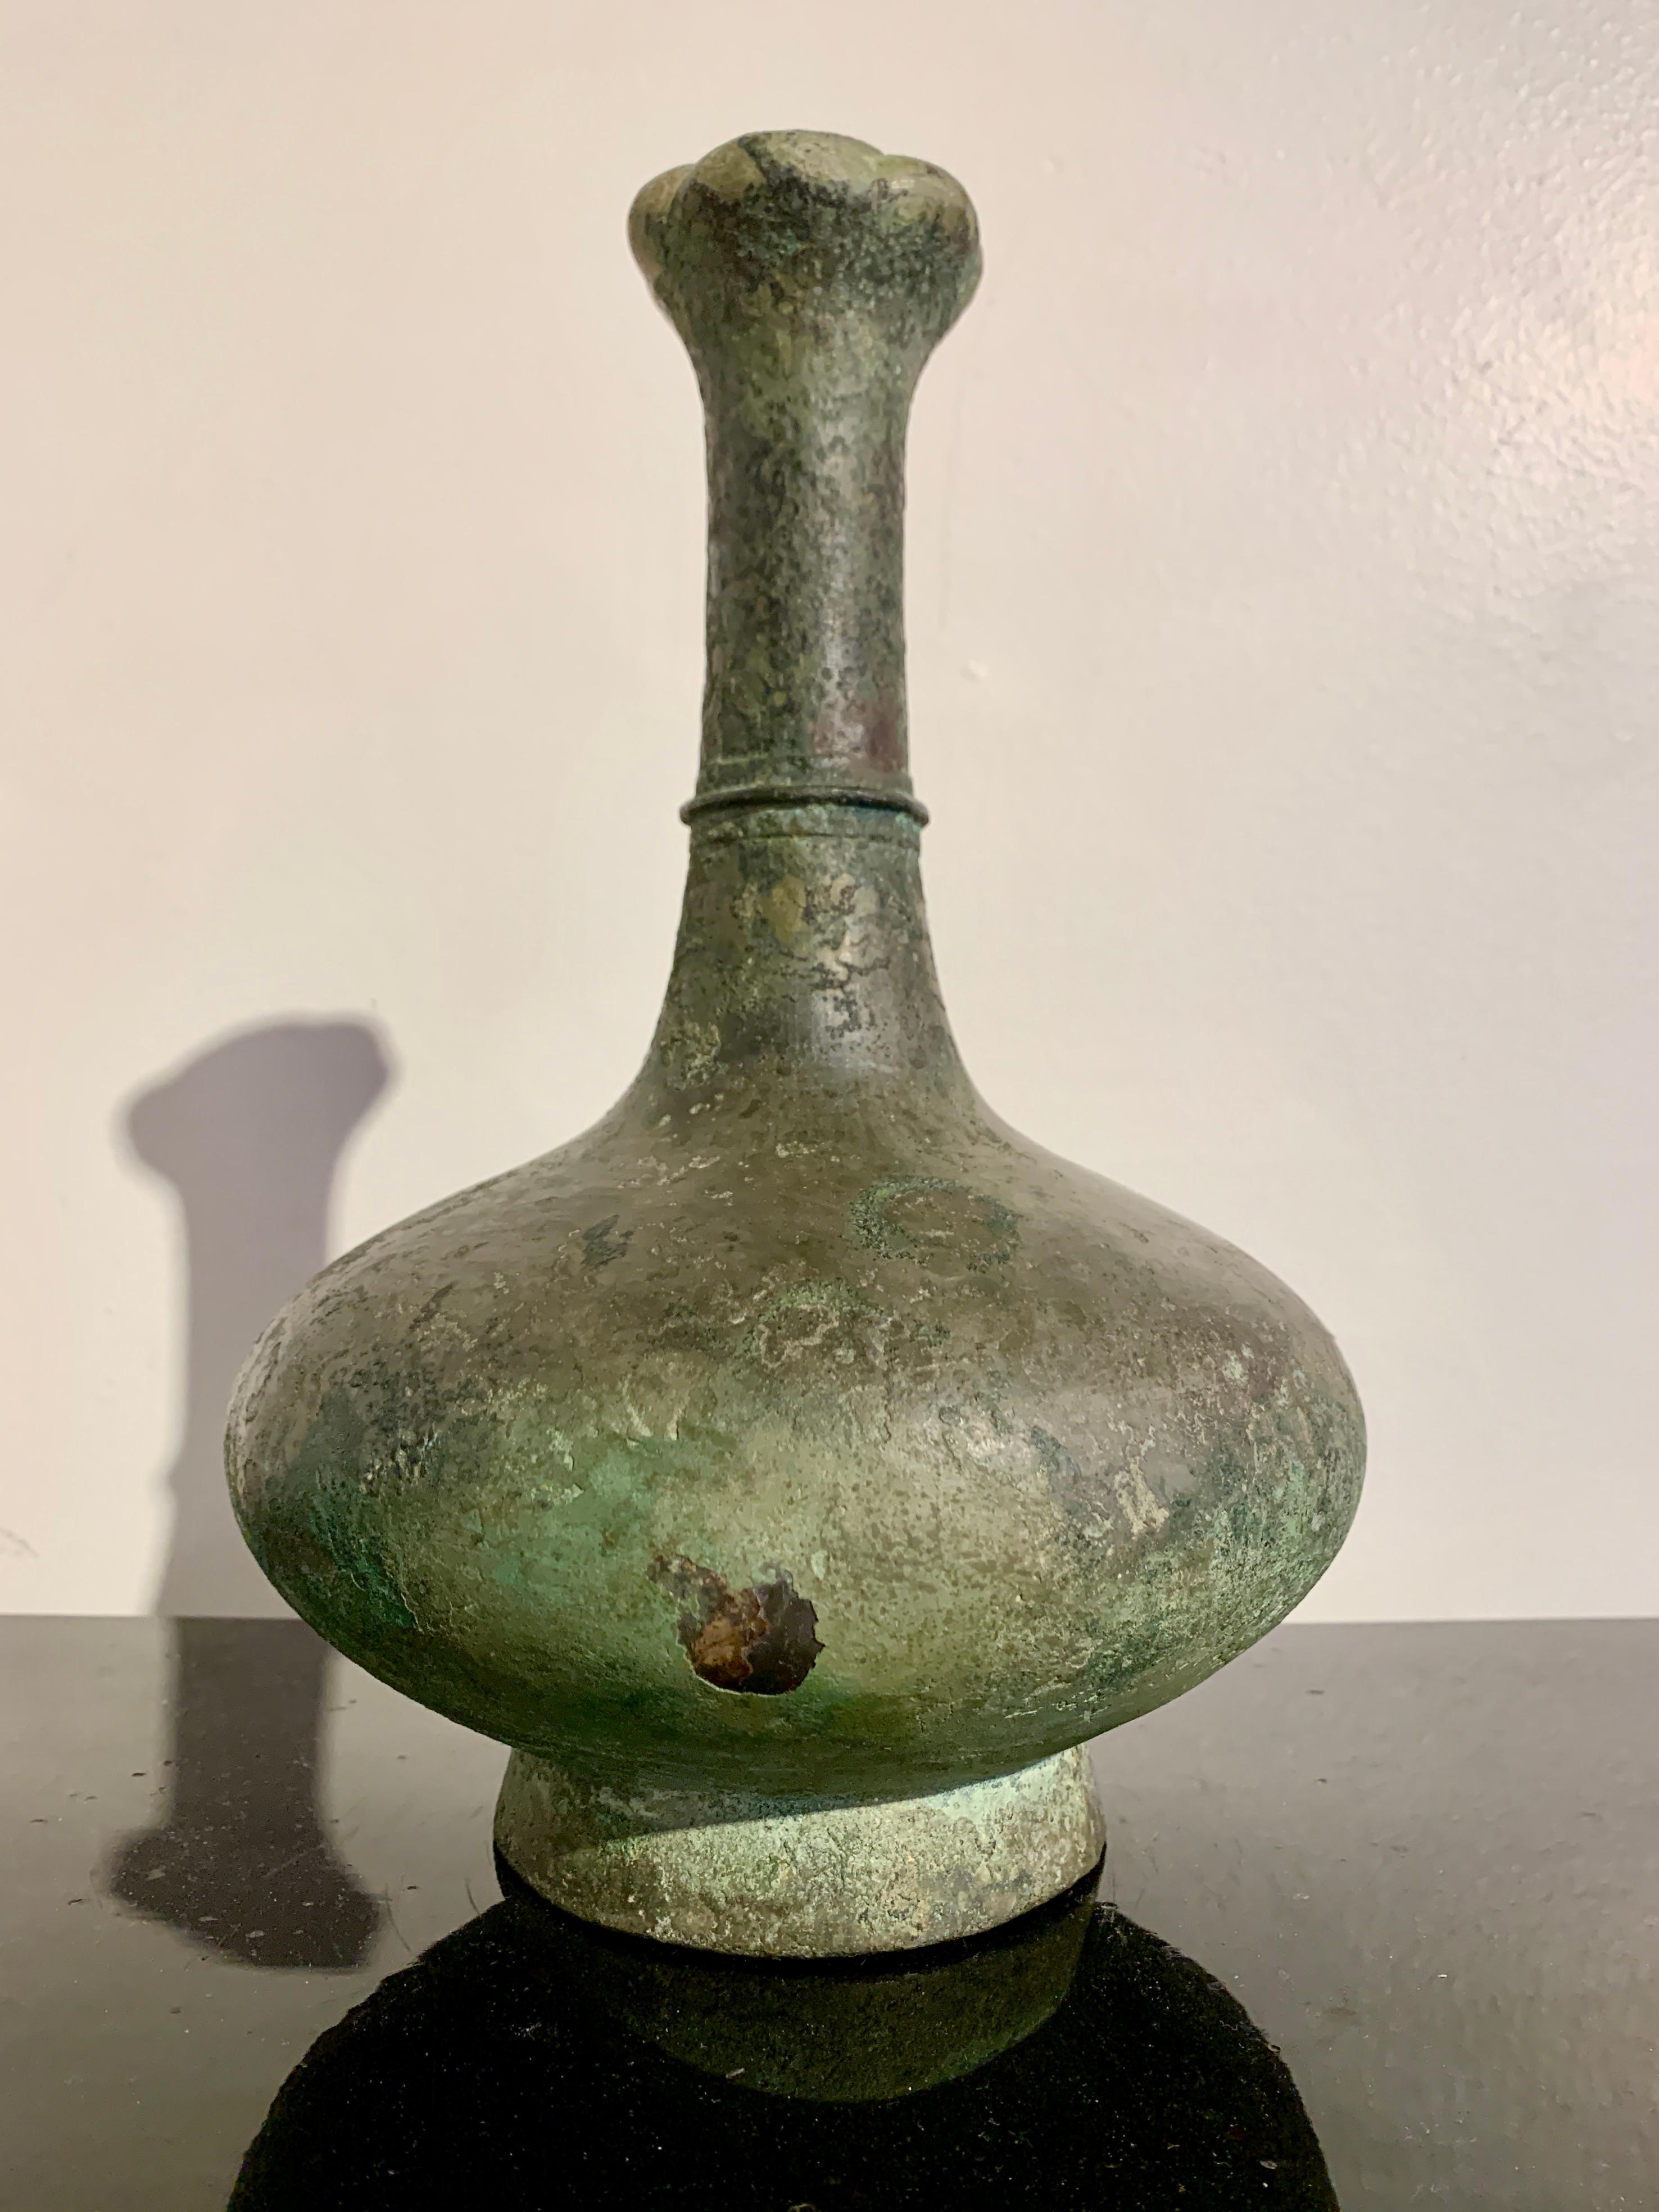 Chinese Western Han Dynasty Bronze Garlic Head Vase, 206 BC - 25 AD In Fair Condition For Sale In Austin, TX